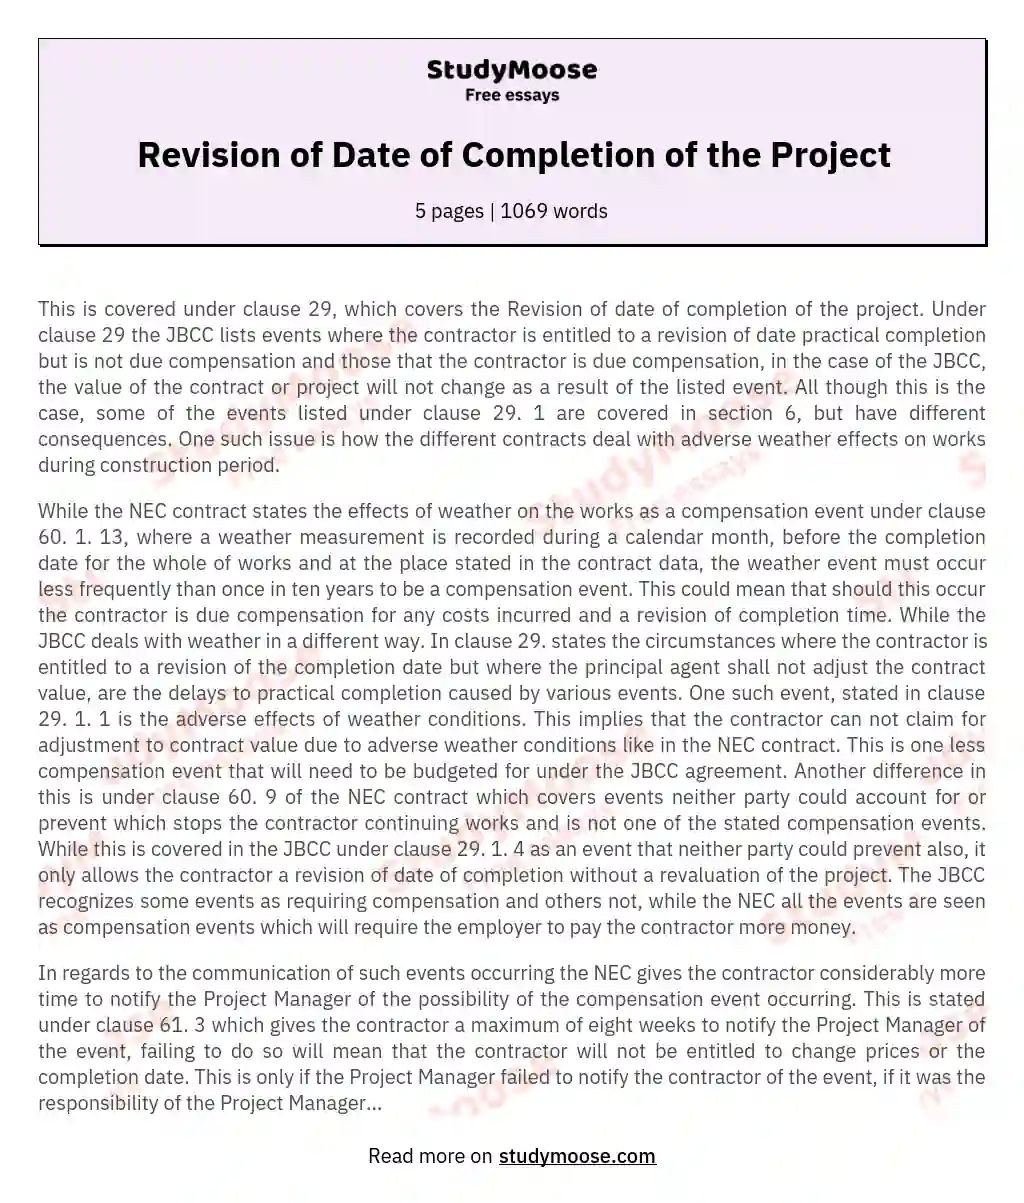 Revision of Date of Completion of the Project